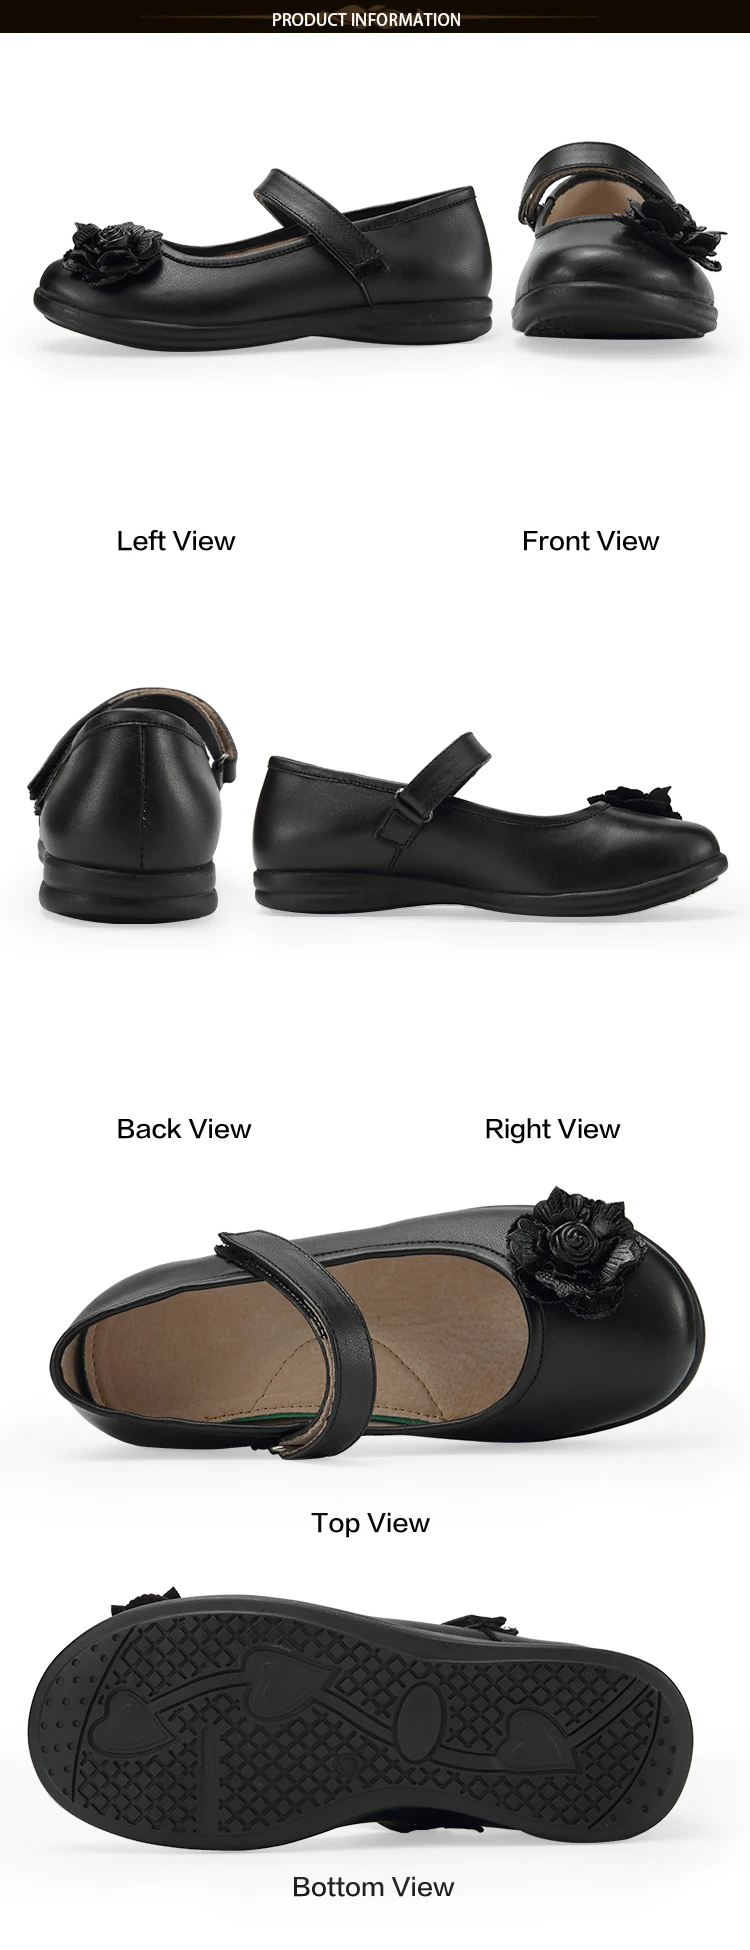 stylish black shoes for school